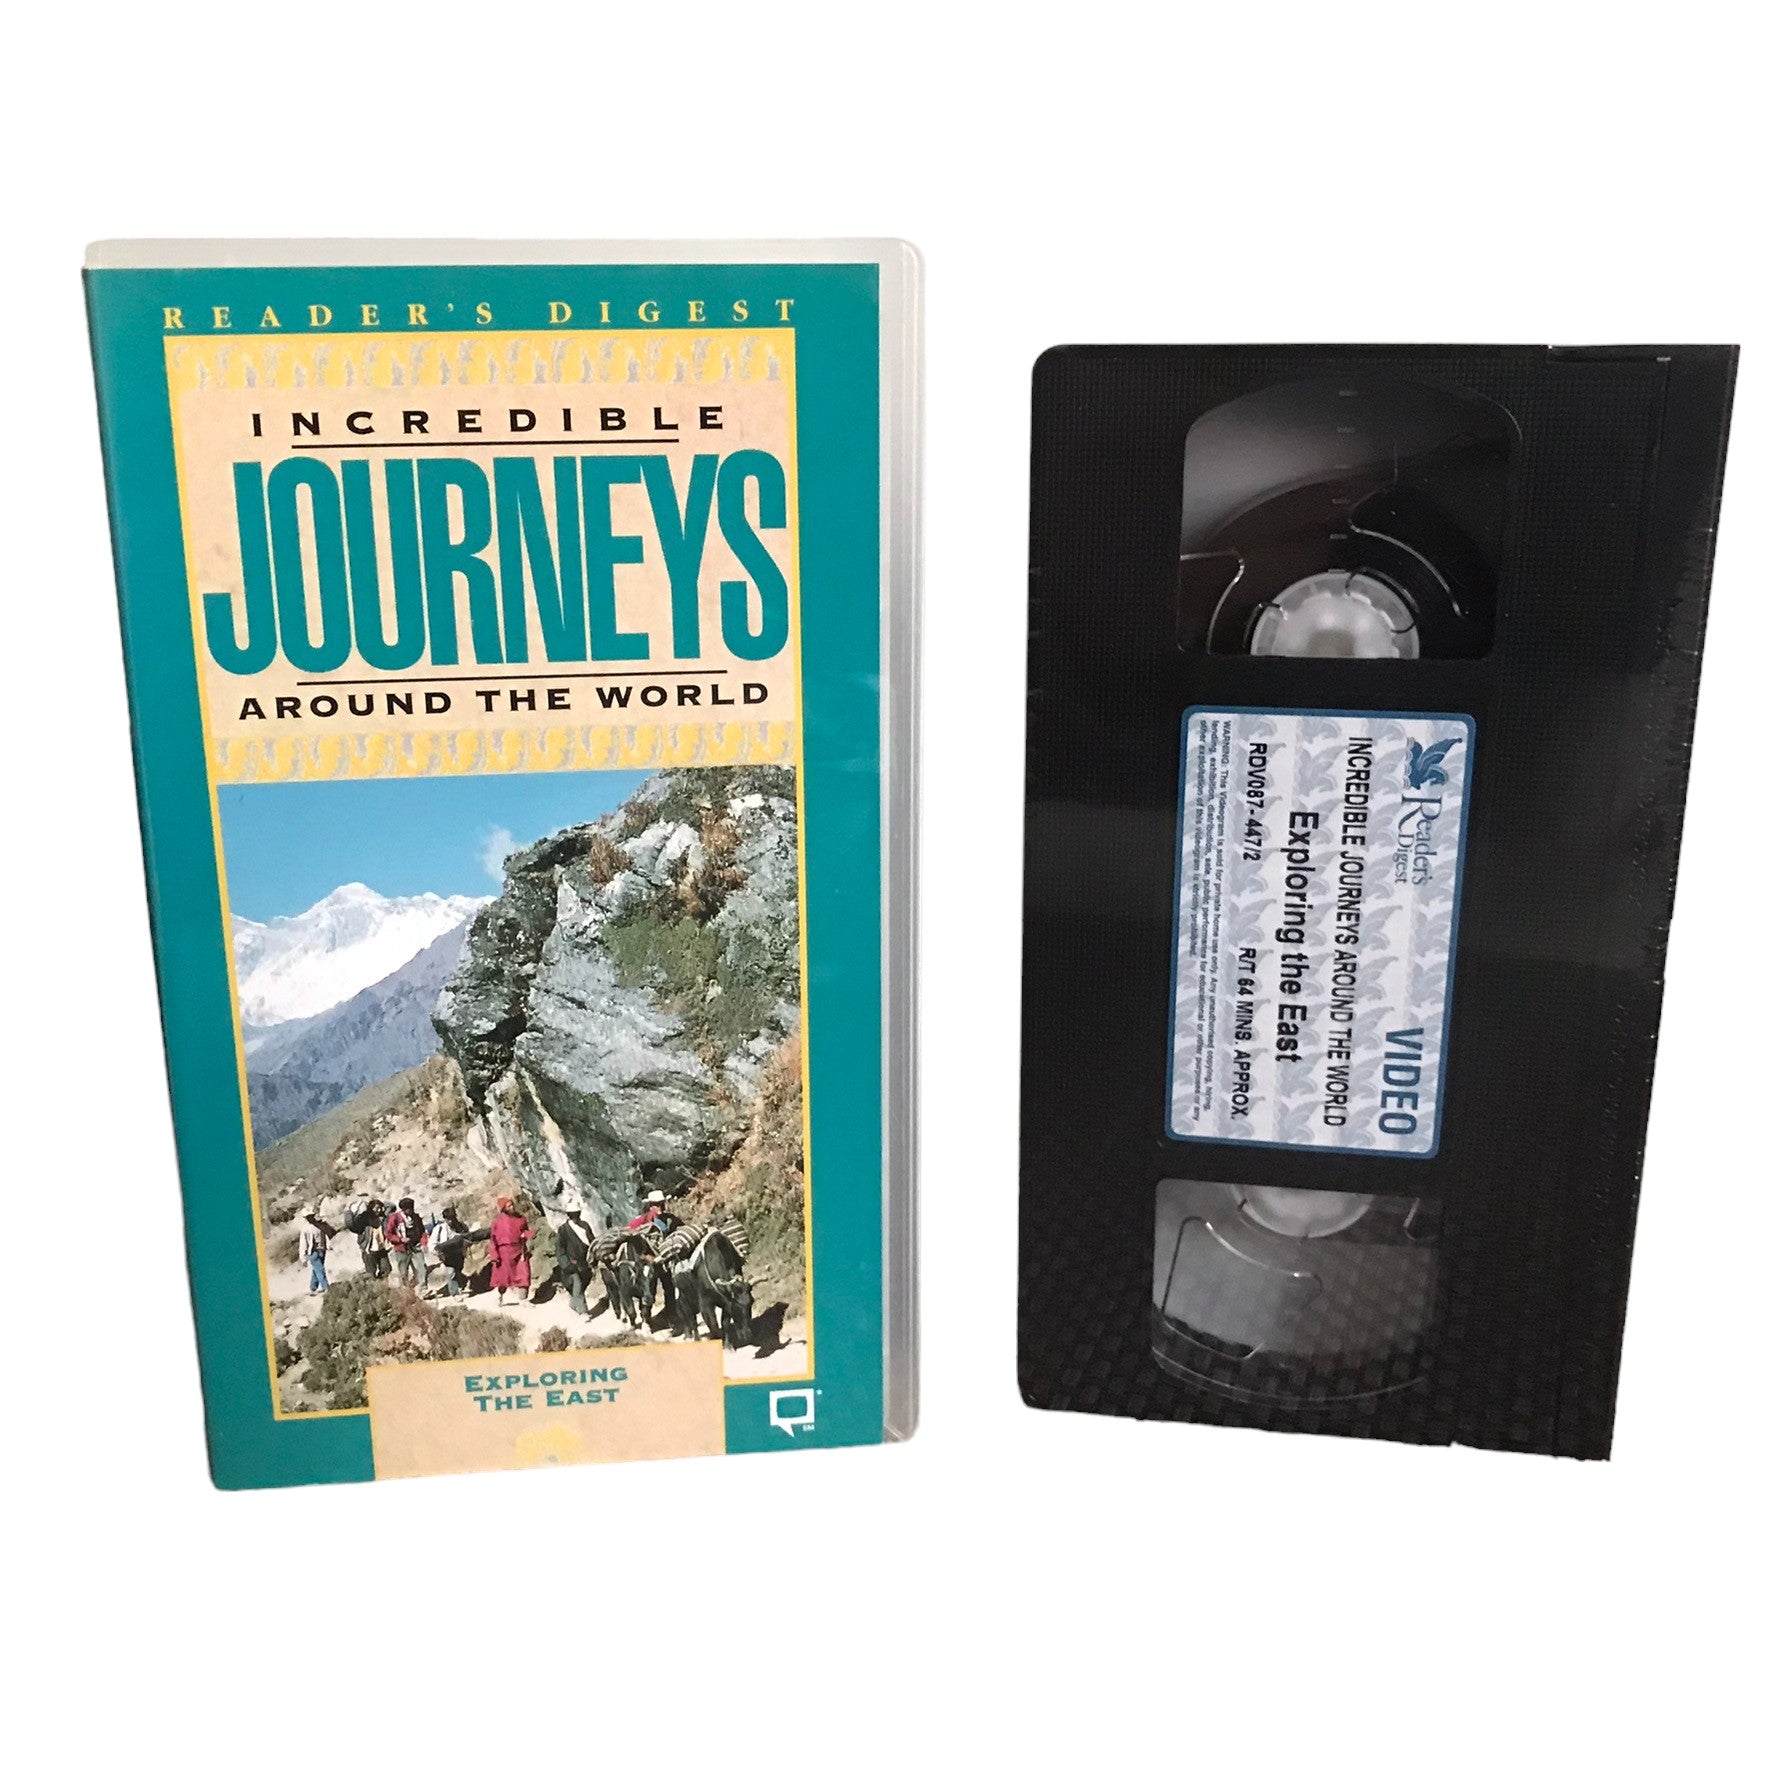 Incredible-Journeys Around The World - Exploring The East - Reader Digest - Soap Opera - Pal - VHS-